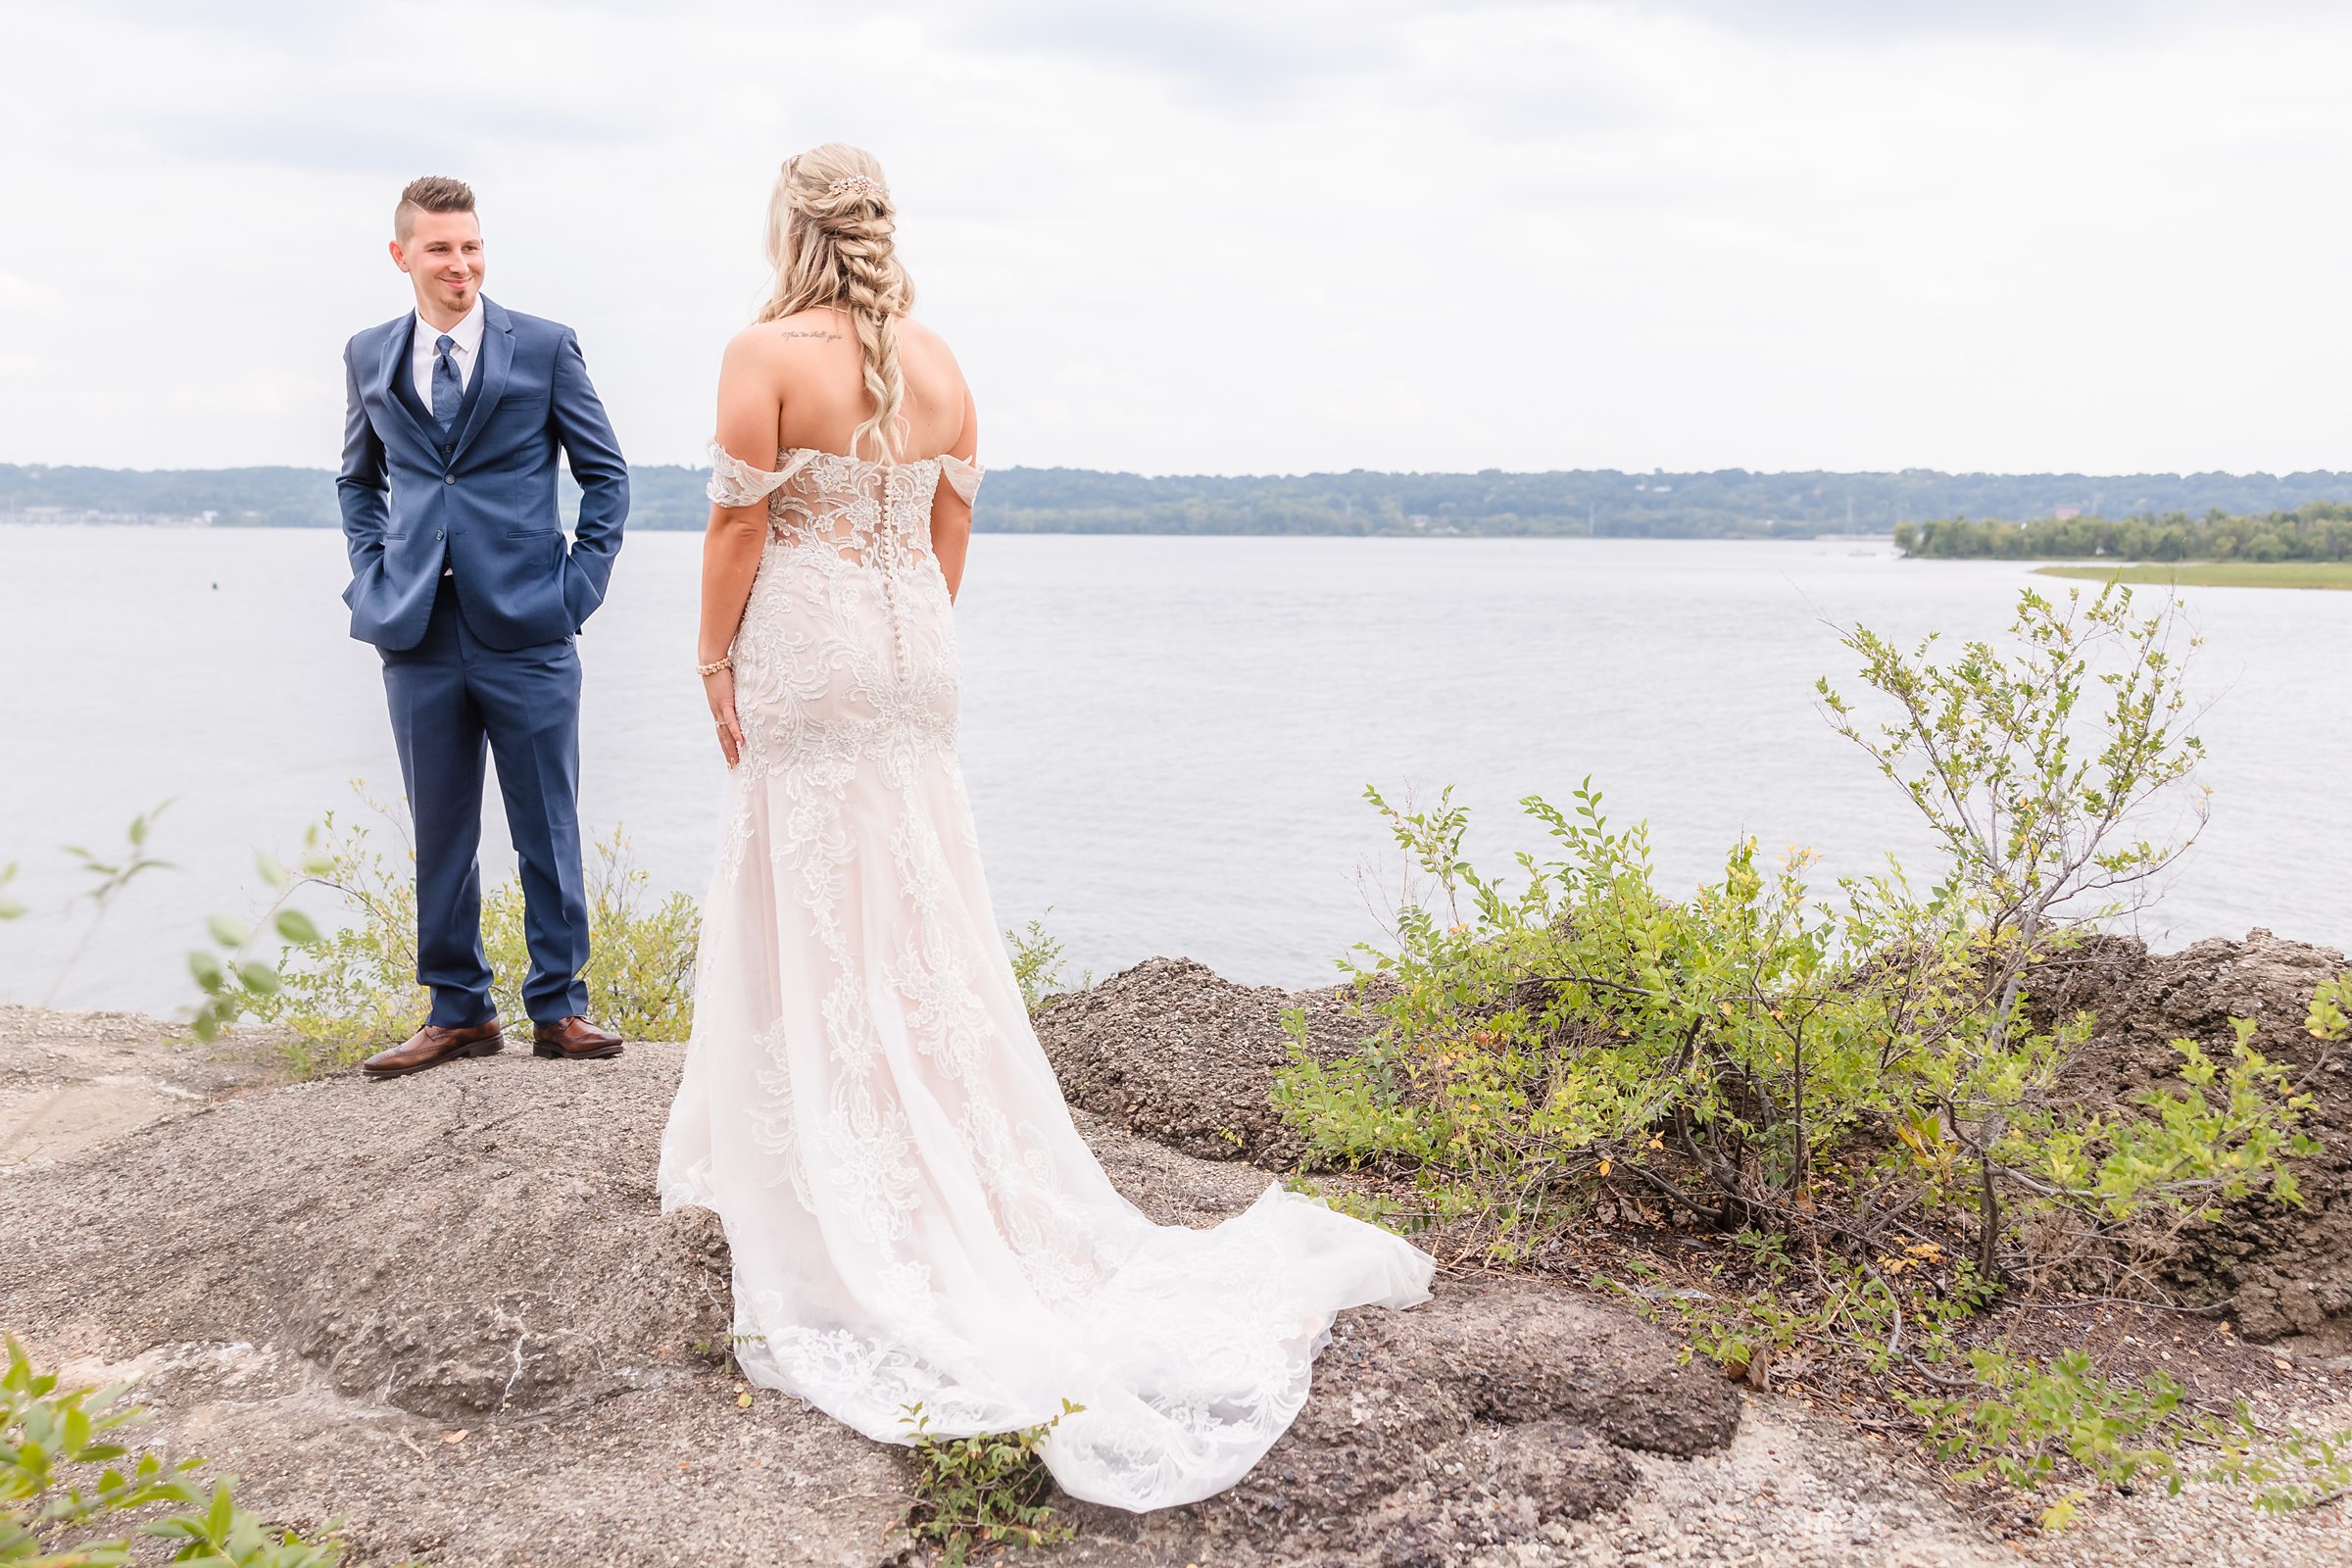 The groom sees his bride for the first time on the Peoria Riverfront in Illinois